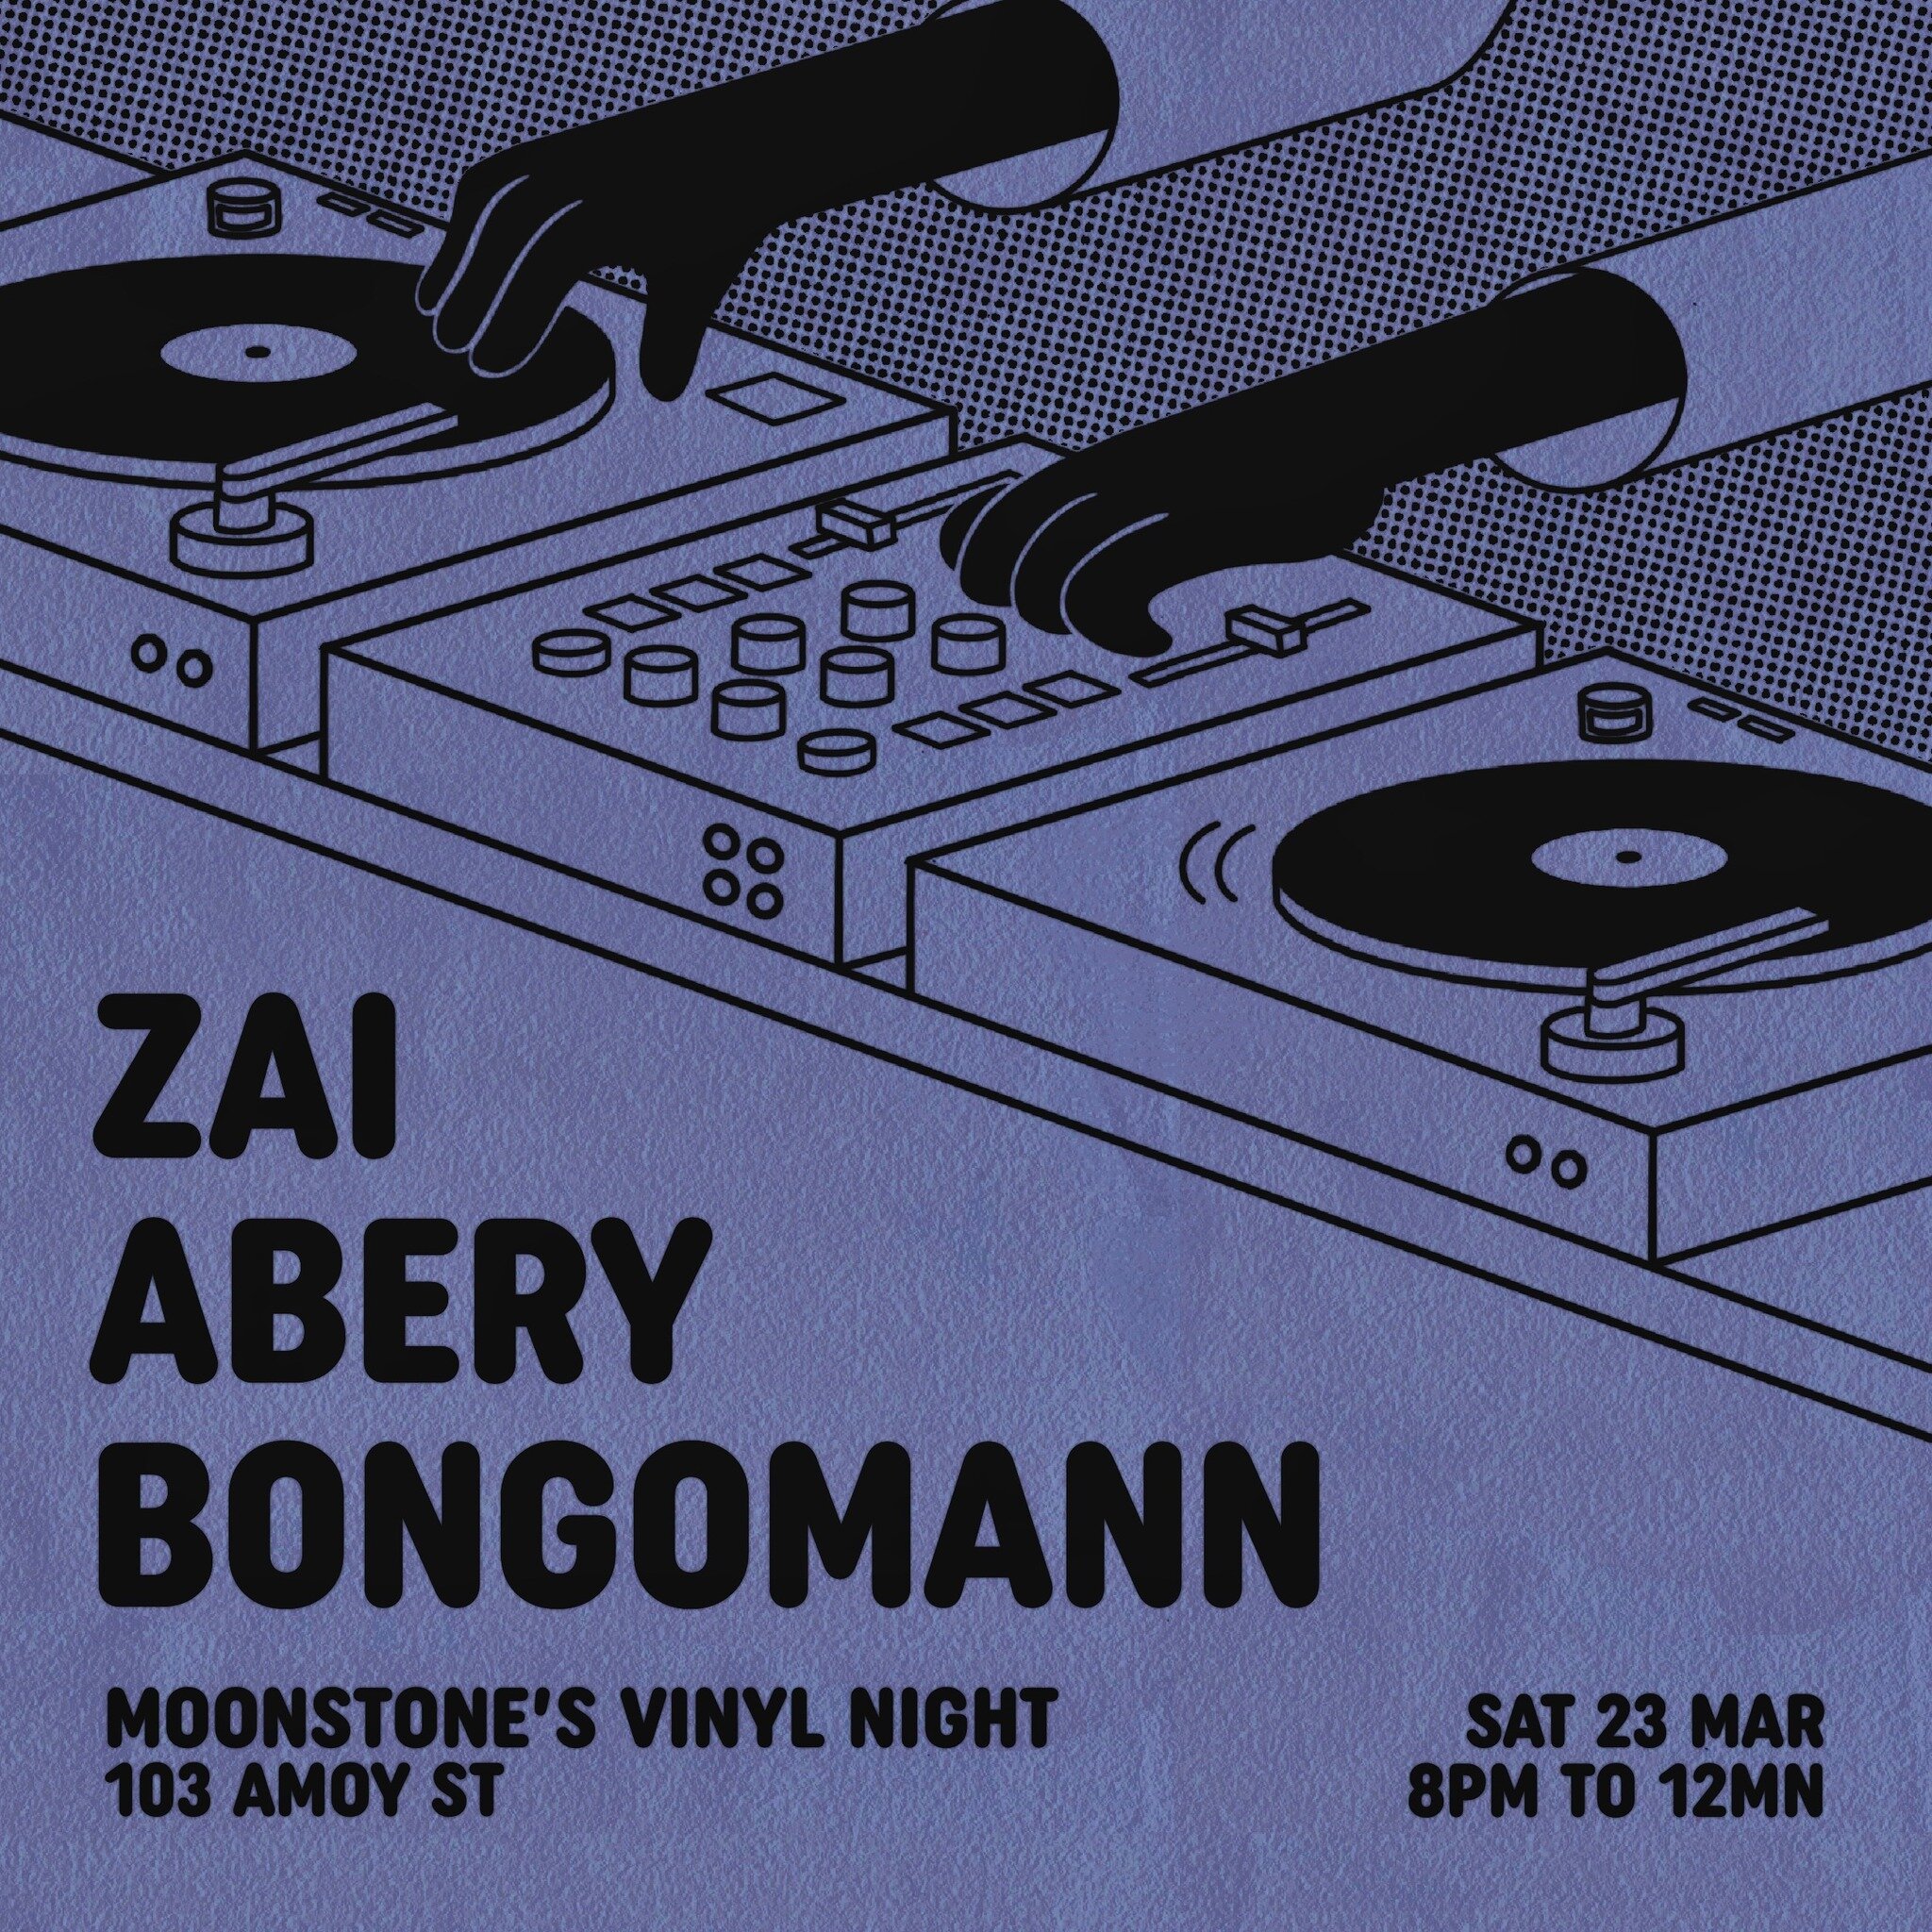 We&rsquo;re going analog in an era dominated by USBs and digital music files 📽️🎞️🎥💿🎶🎵

Rediscover classics, find some unique tracks, listen to the distinct warm sounds of vinyl and celebrate its tactile appeal with us as these talented DJs show